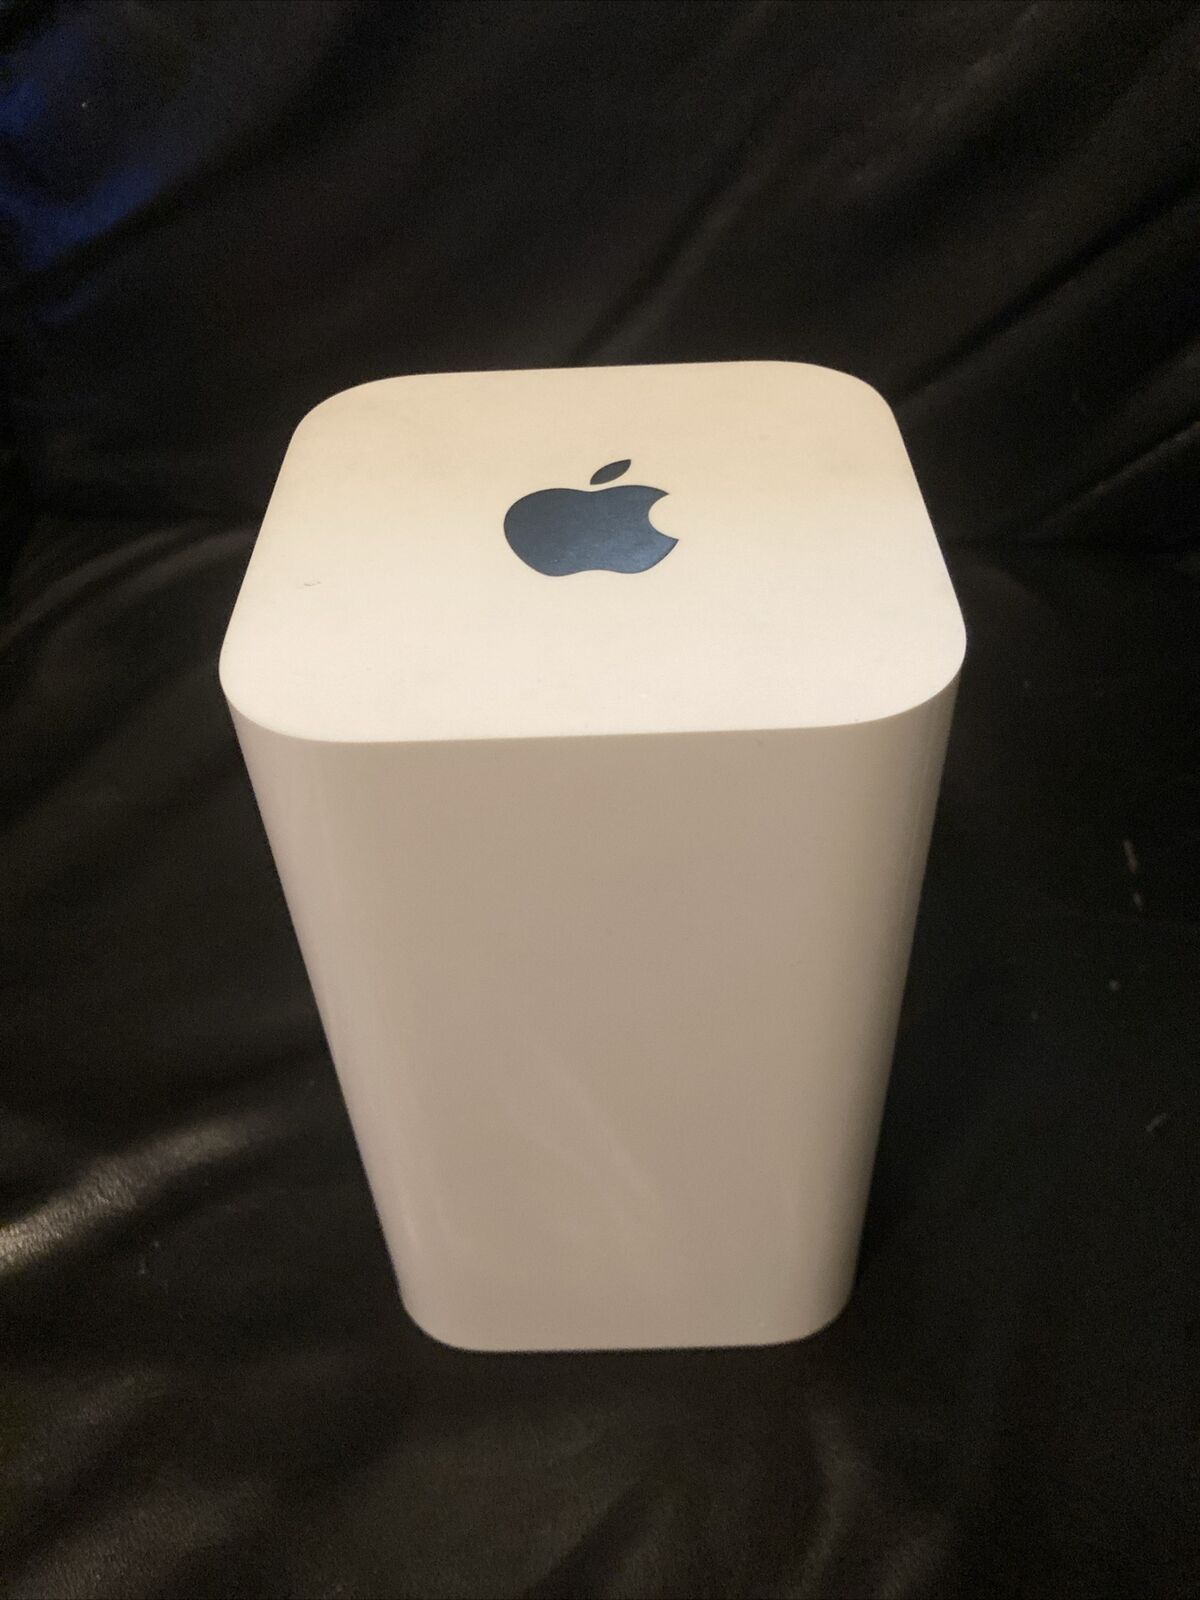 Apple AirPort Extreme 13000Mbps 3 Port Base Station Wireless AC Router -...